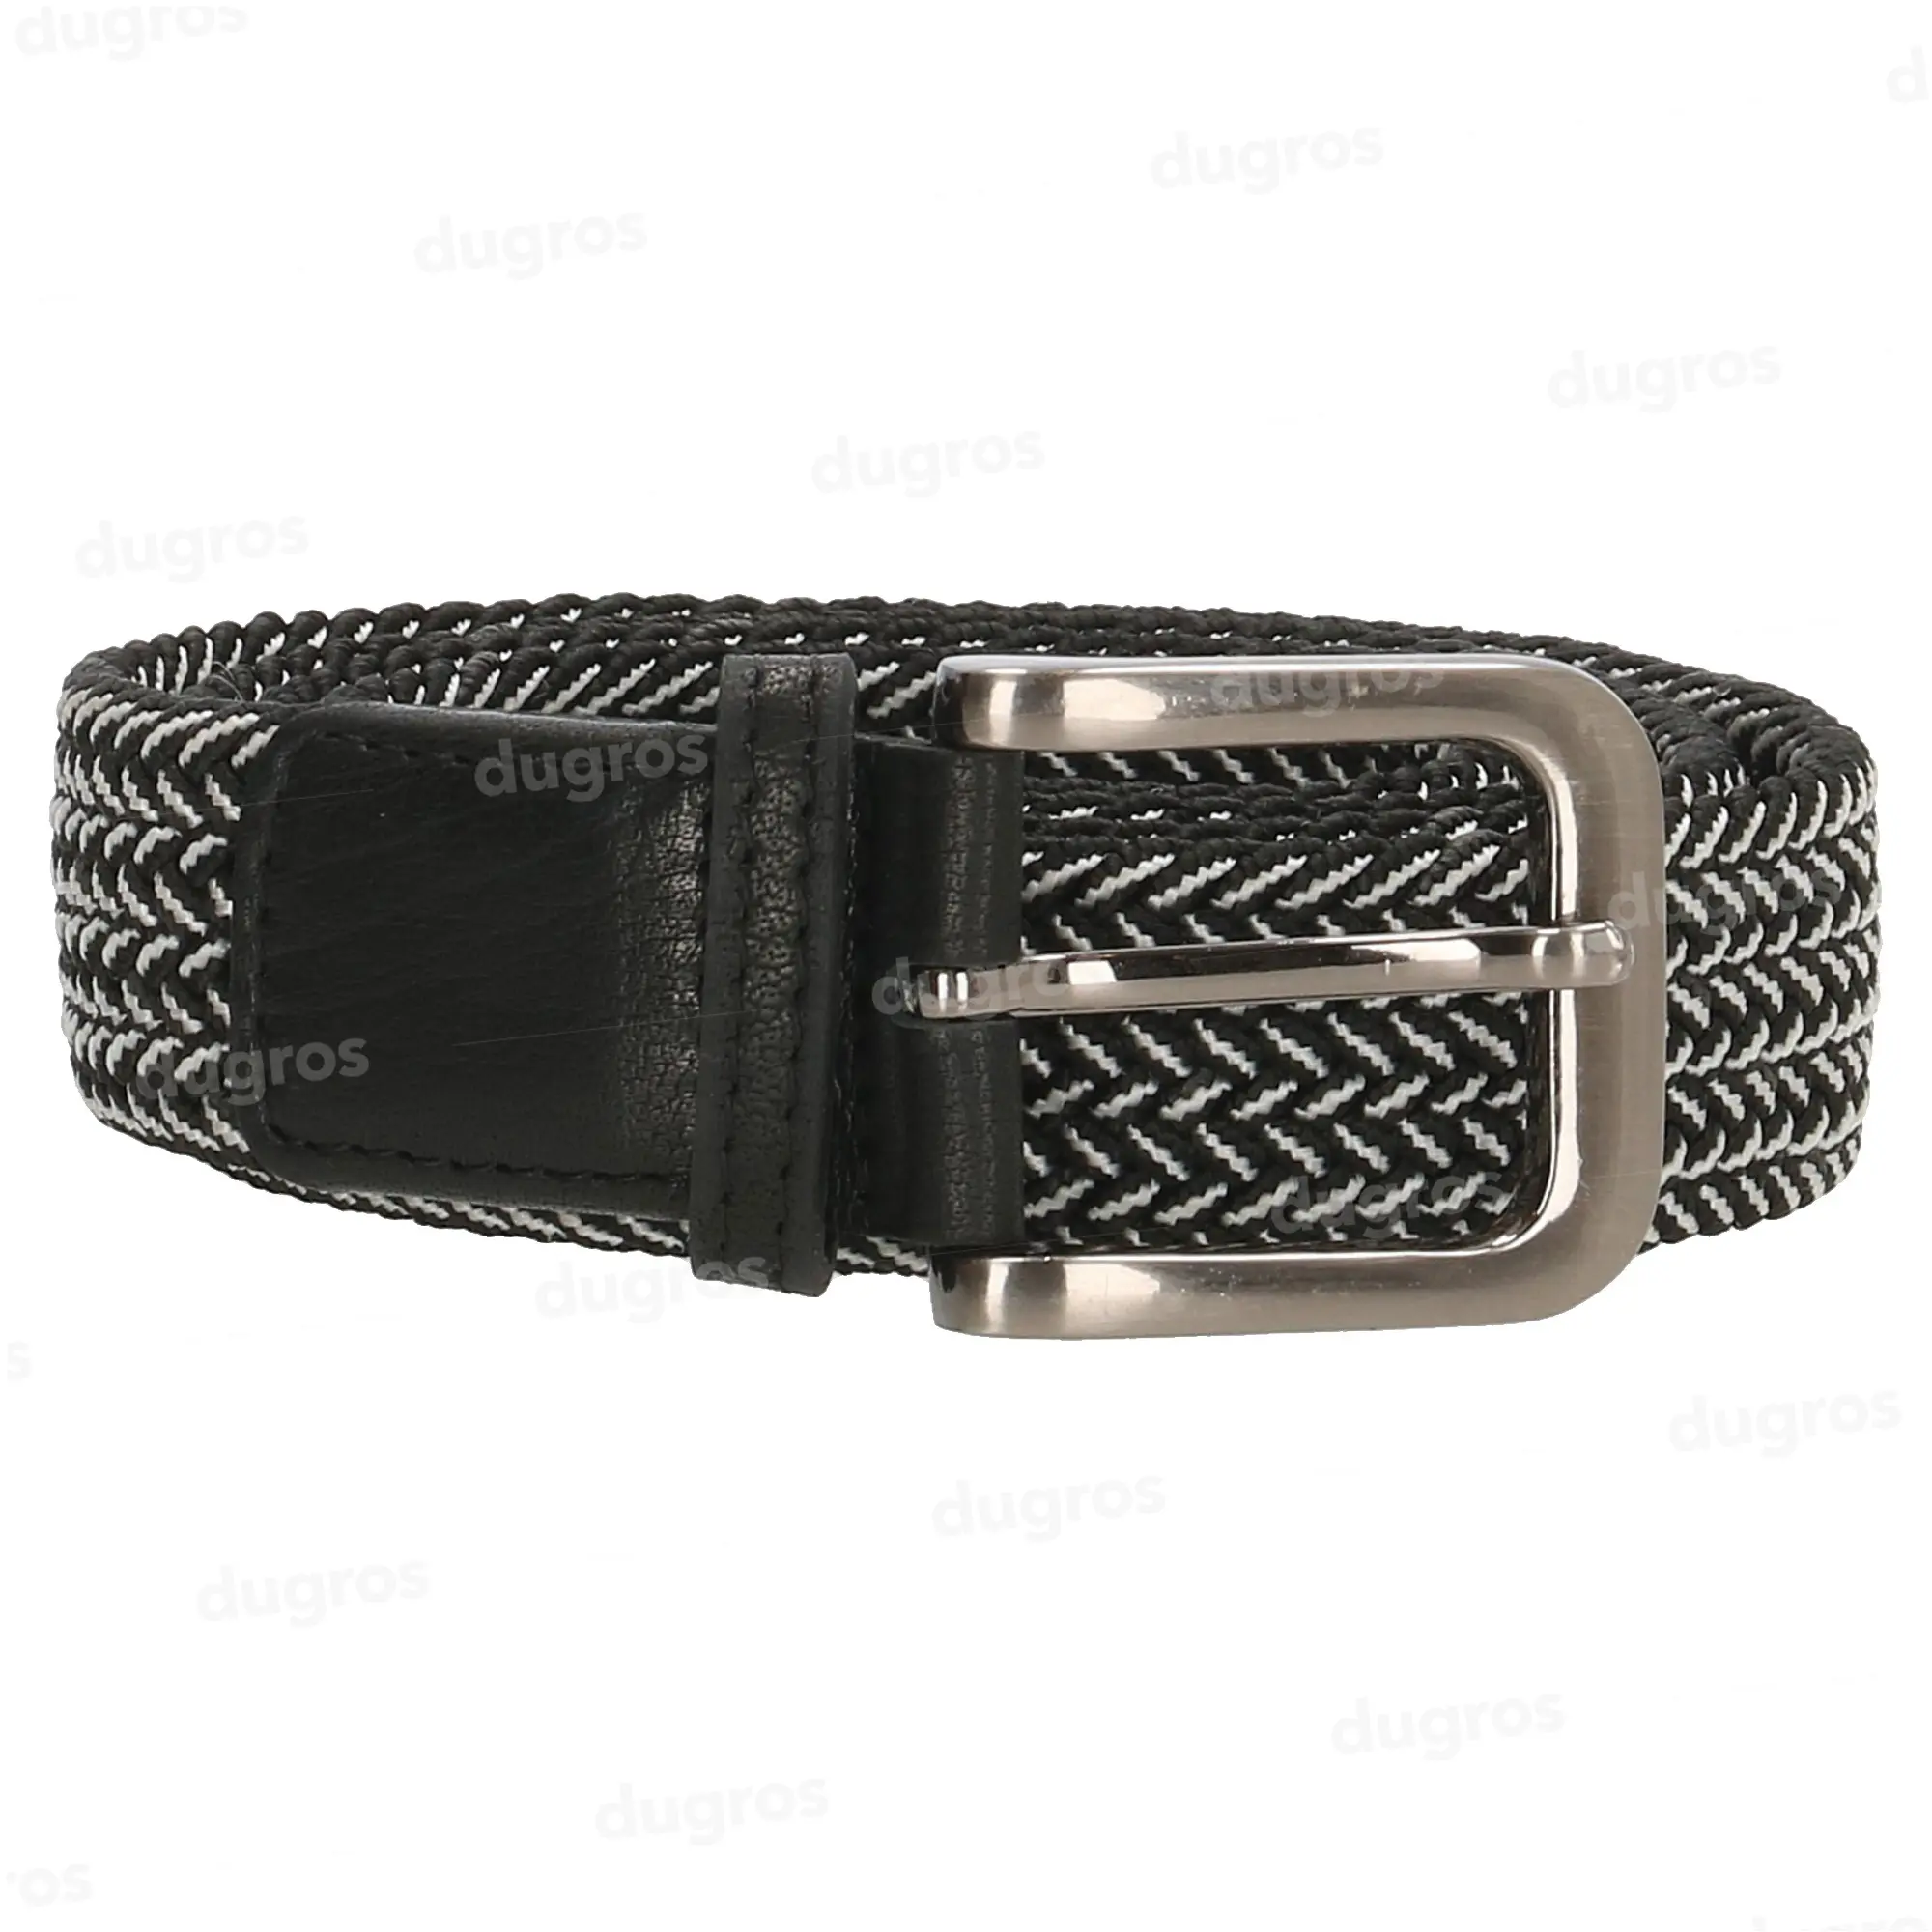 High quality comfortable elastic belt multi color knit for men made in the Netherlands